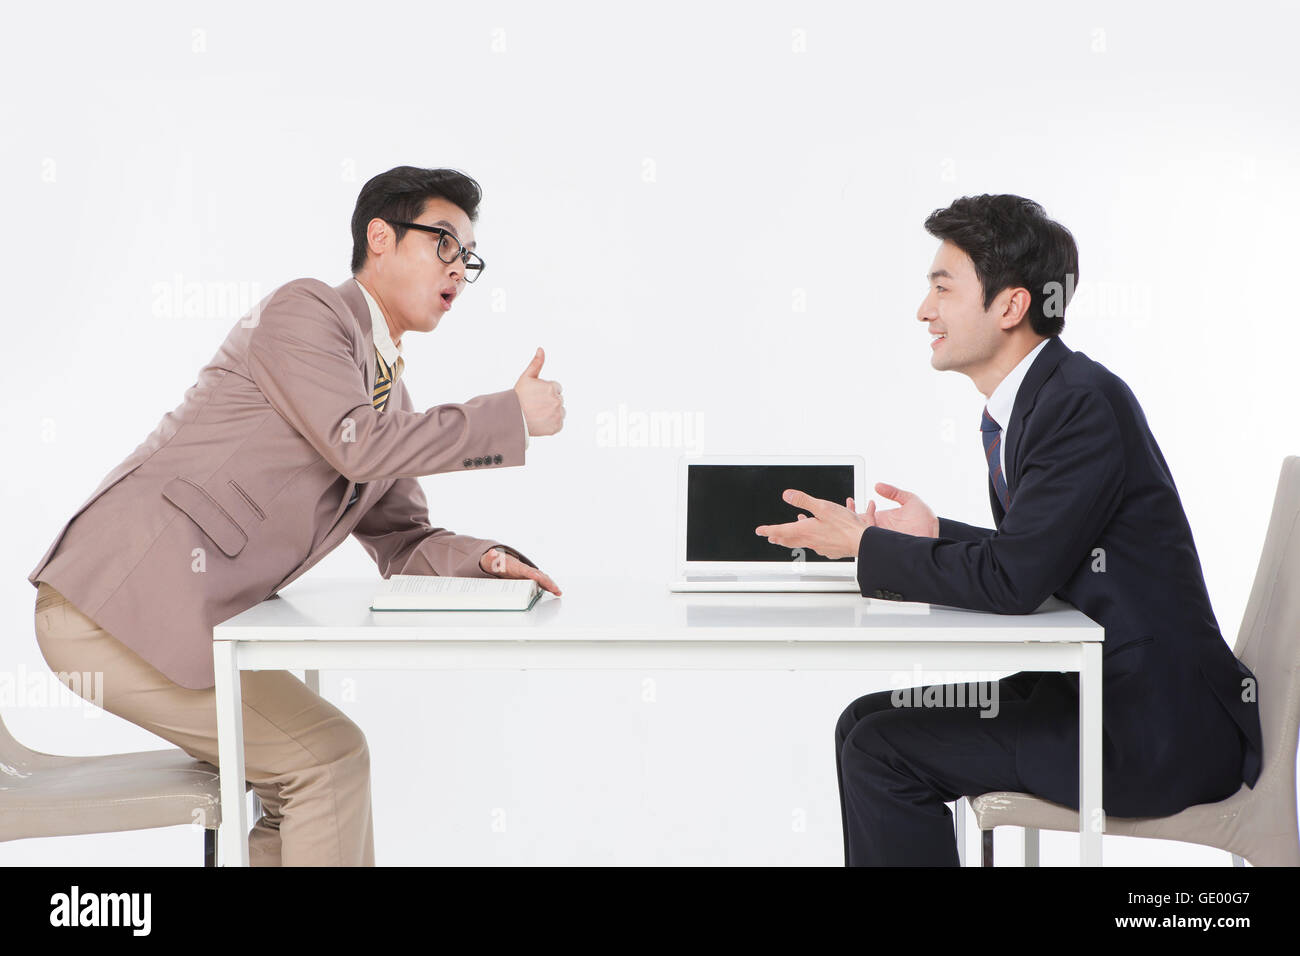 Side view of two business men at table face to face, one surprised and the other smiling Stock Photo